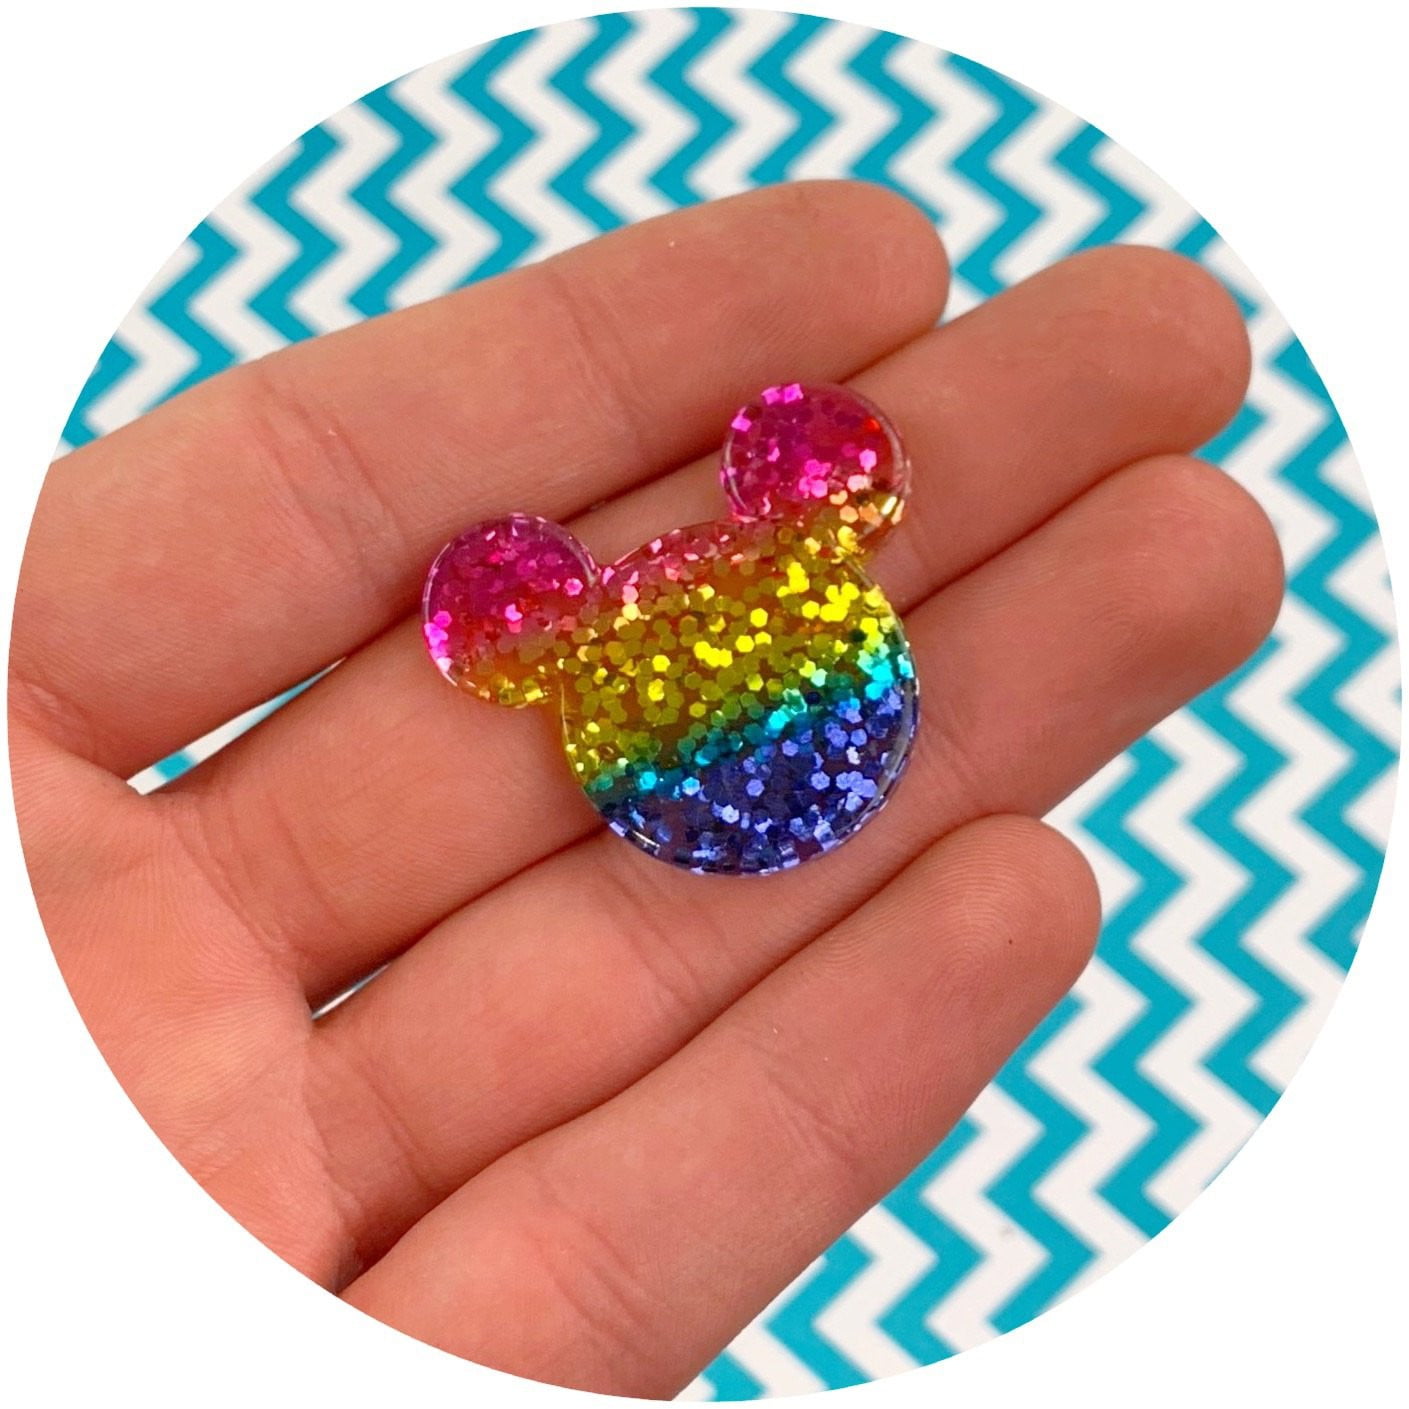 Holographic Mickey Mouse Charm - Fimo Slices - Dope Slimes LLC - Dope Slimes LLC